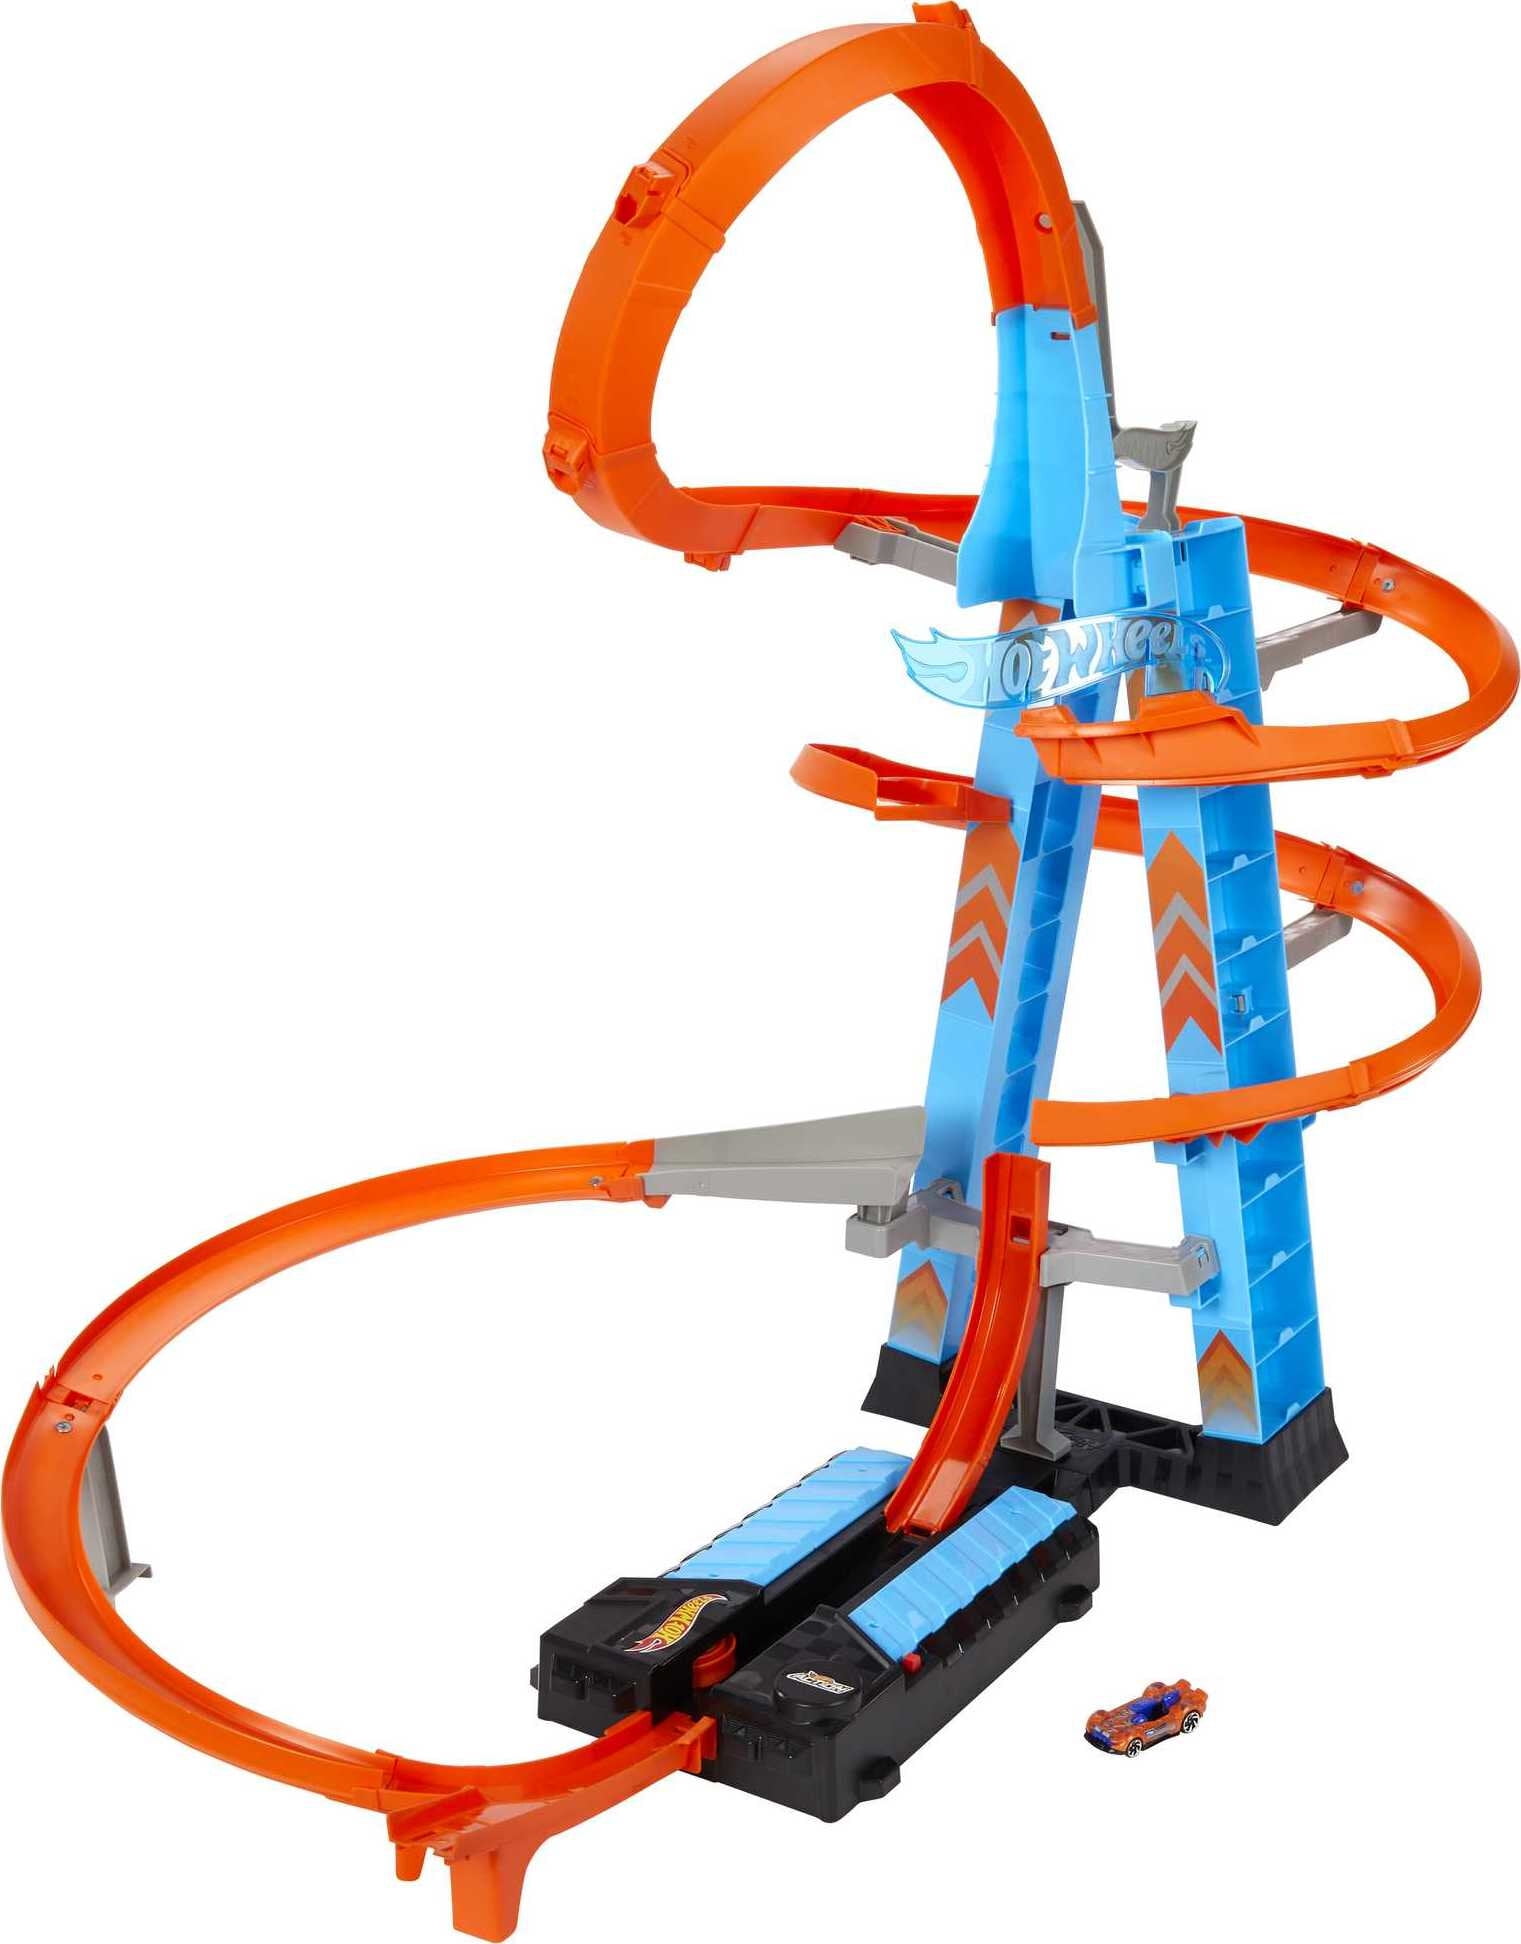 10 pieces of 2 Foot Hot Wheels Track 